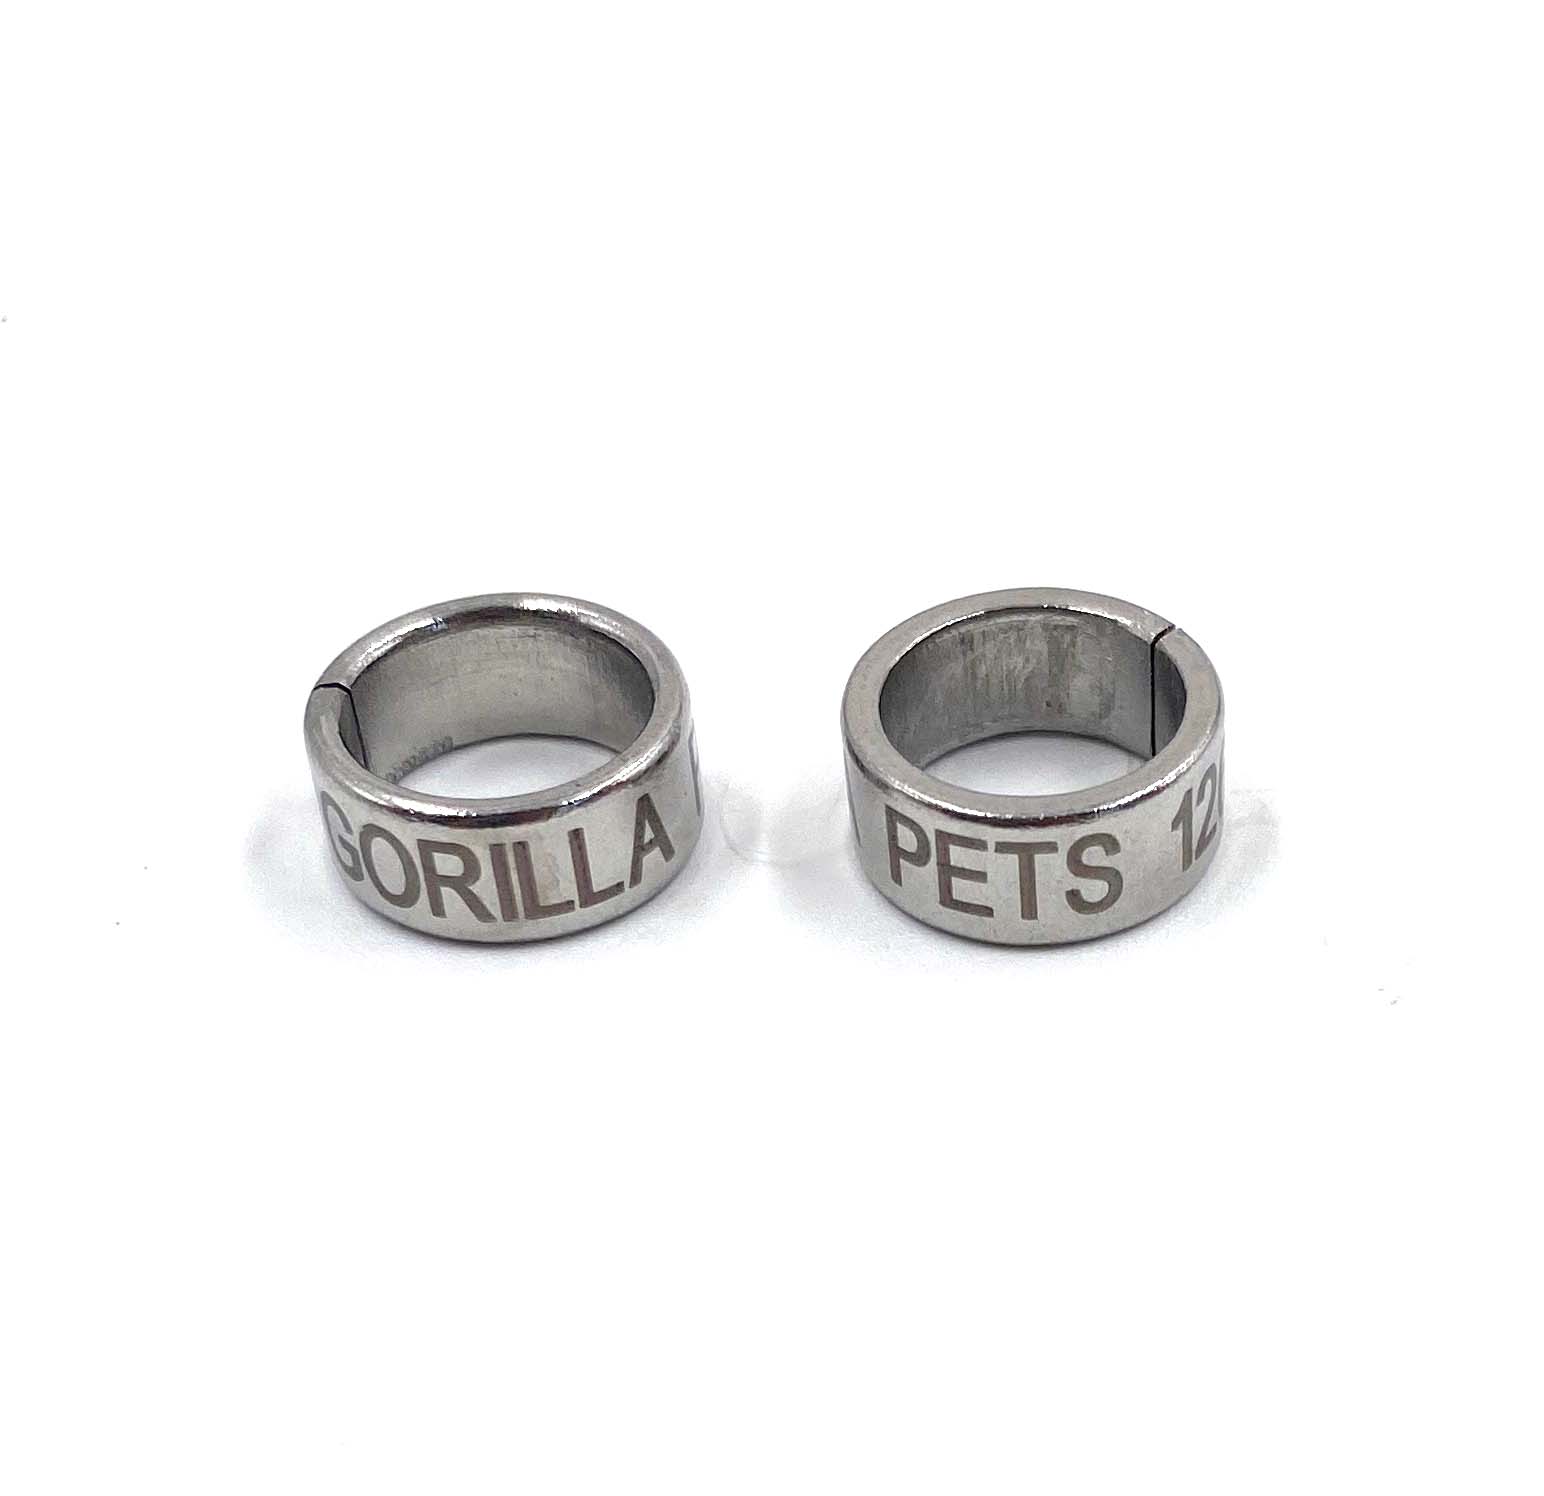 Gorilla pets Parrot Ring for Blue Gold MACHOW Set of Two…